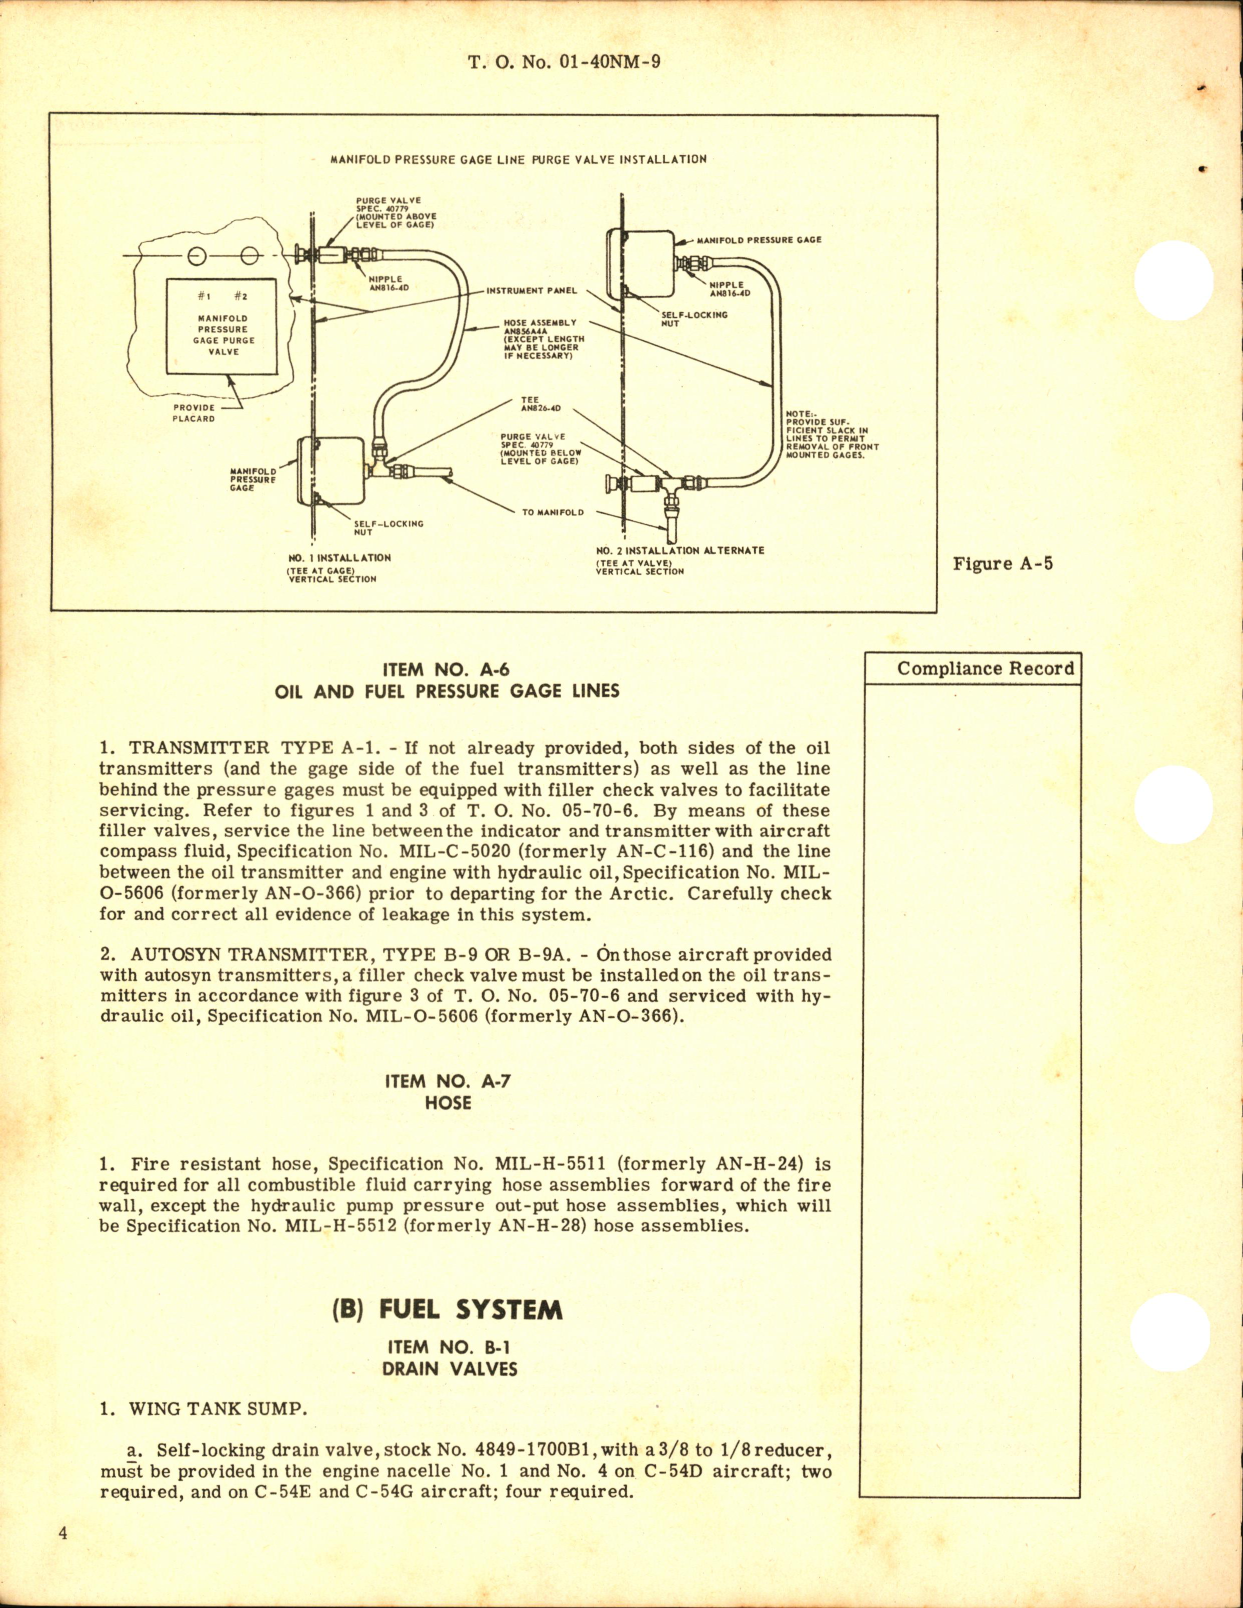 Sample page 6 from AirCorps Library document: Winterization Instructions and Check List for C-54D, E, and G Aircraft